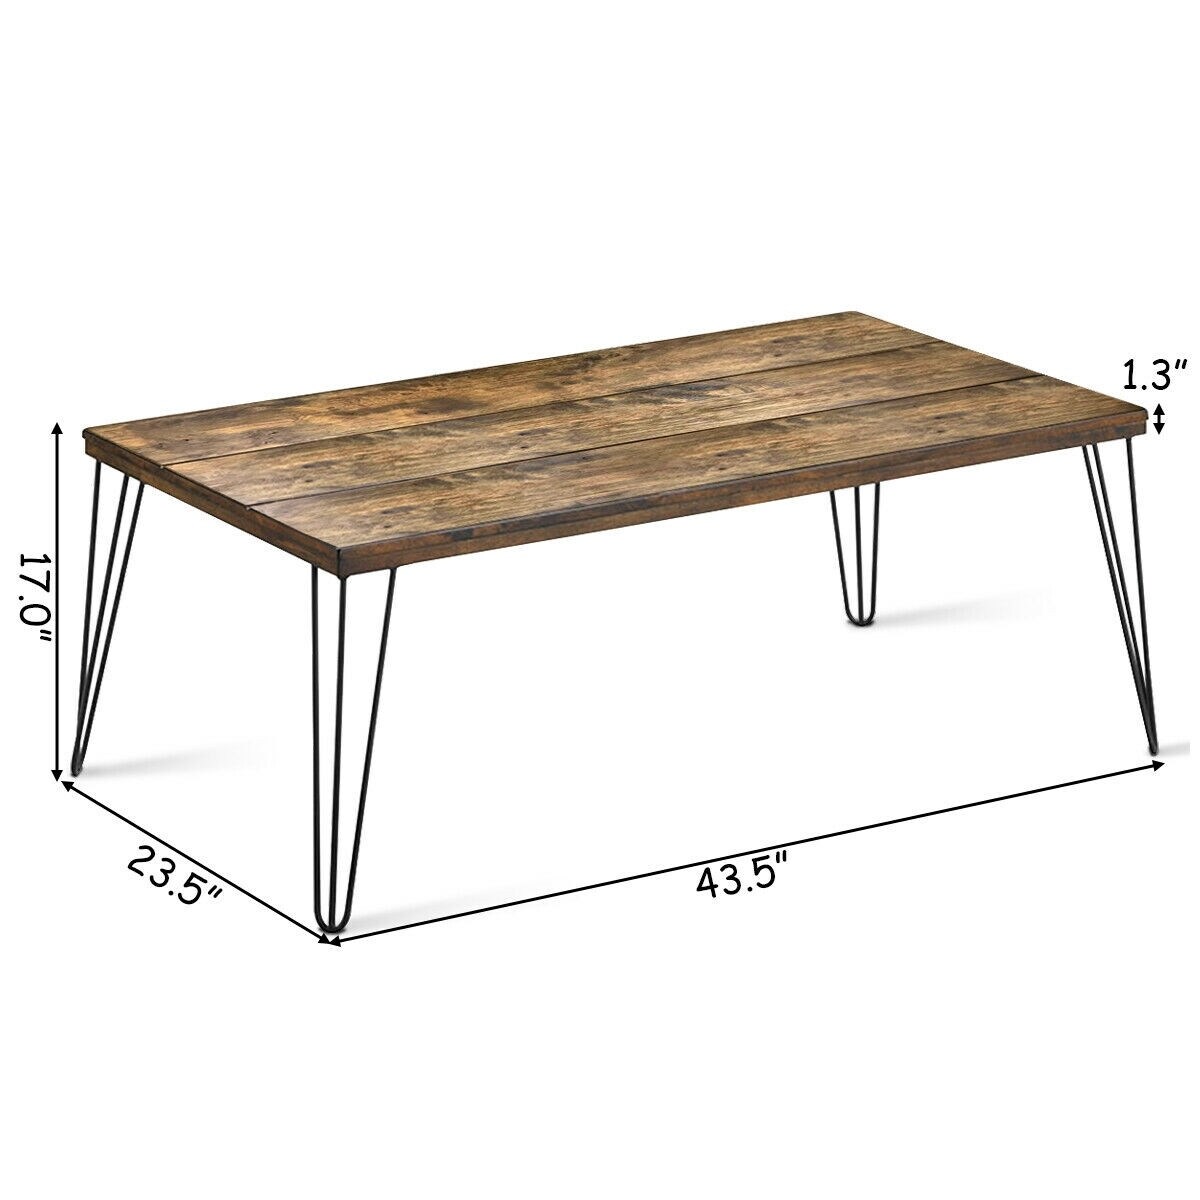 Rustic Industrial Solid Wood Rectangular Cocktail Coffee Table - 43.5" L x 23.5" W x 17" H